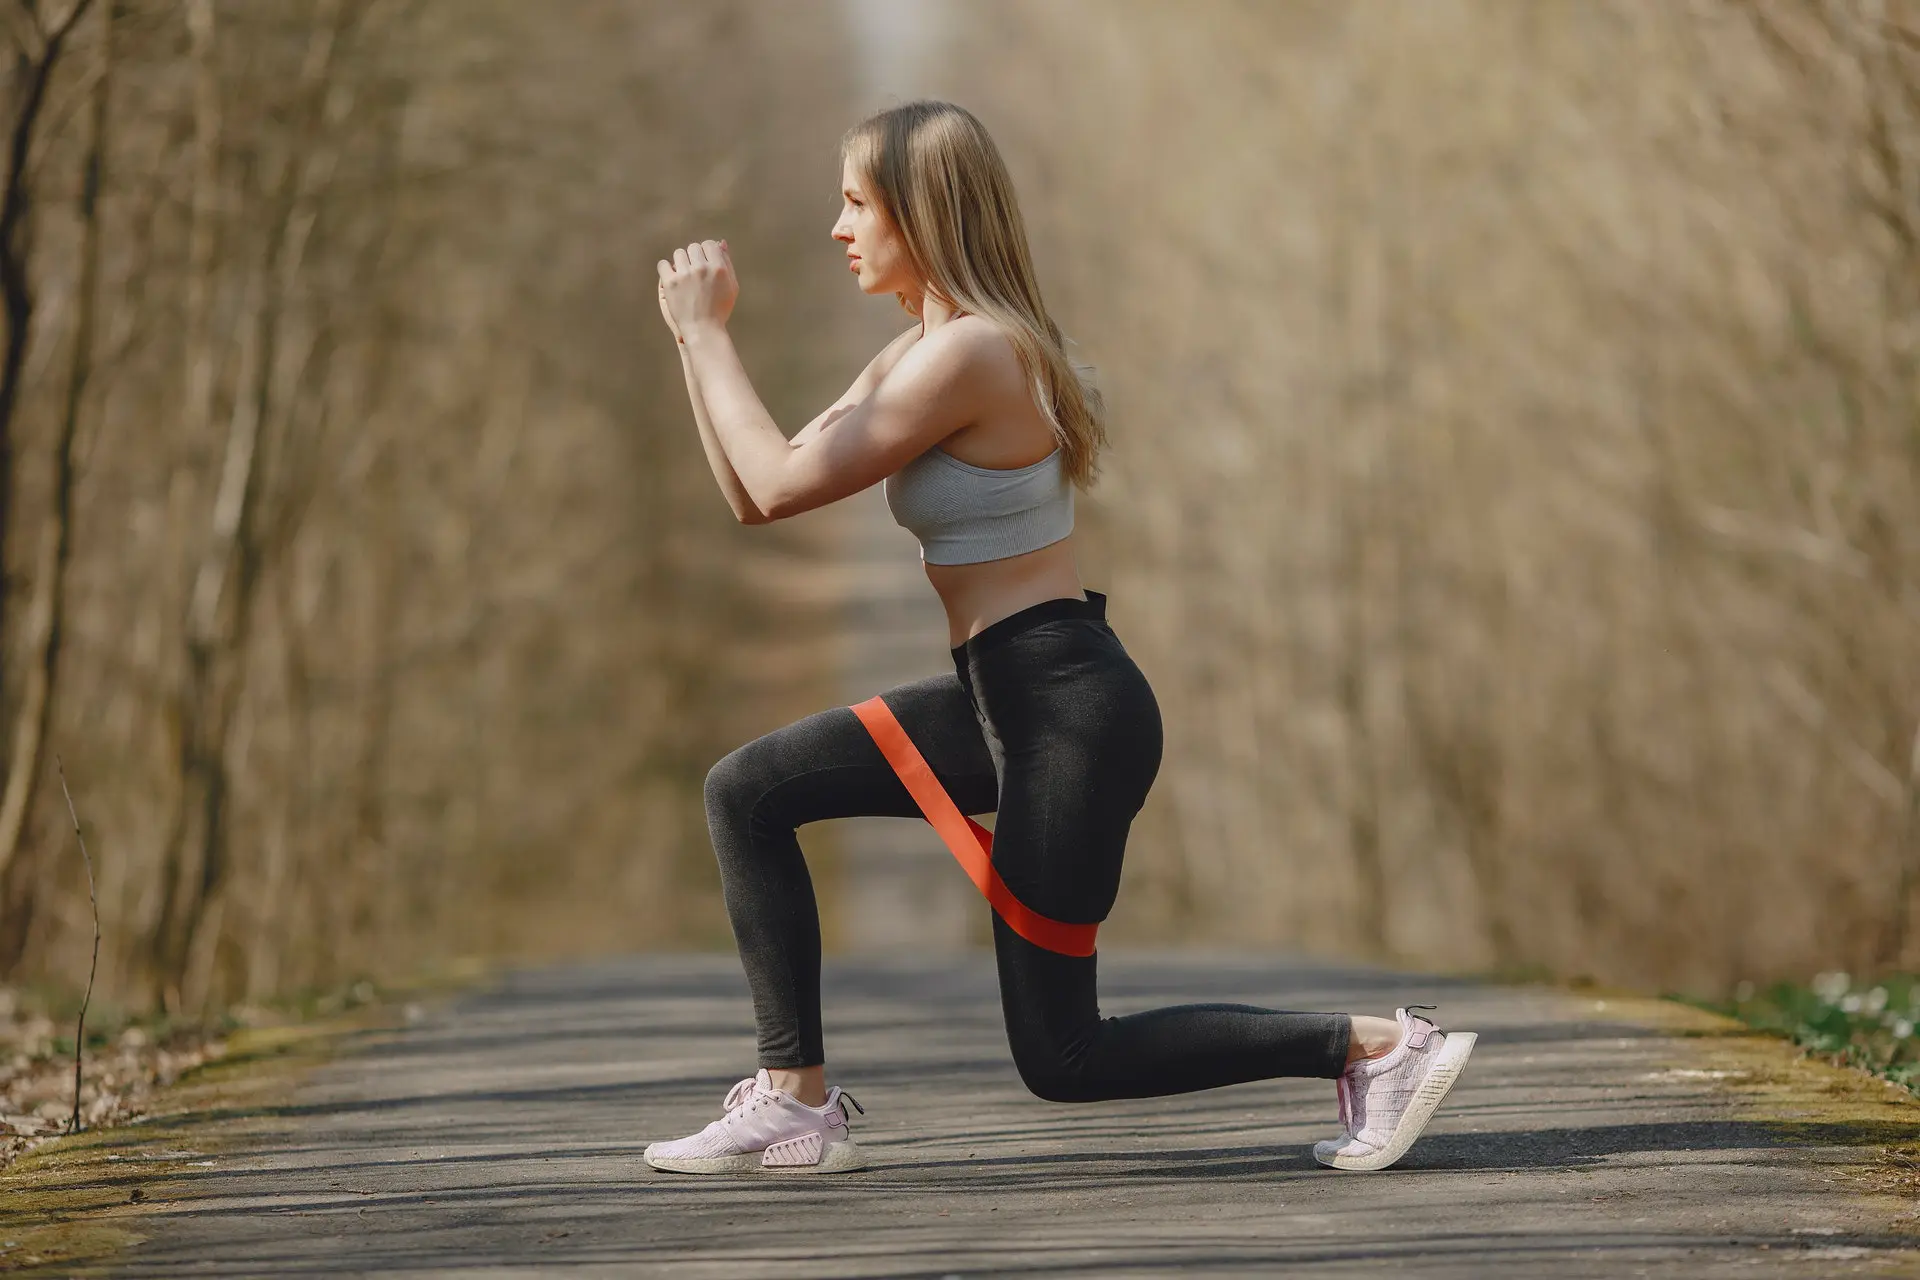 Working With Resistance Bands: Exercises and Techniques - Body+